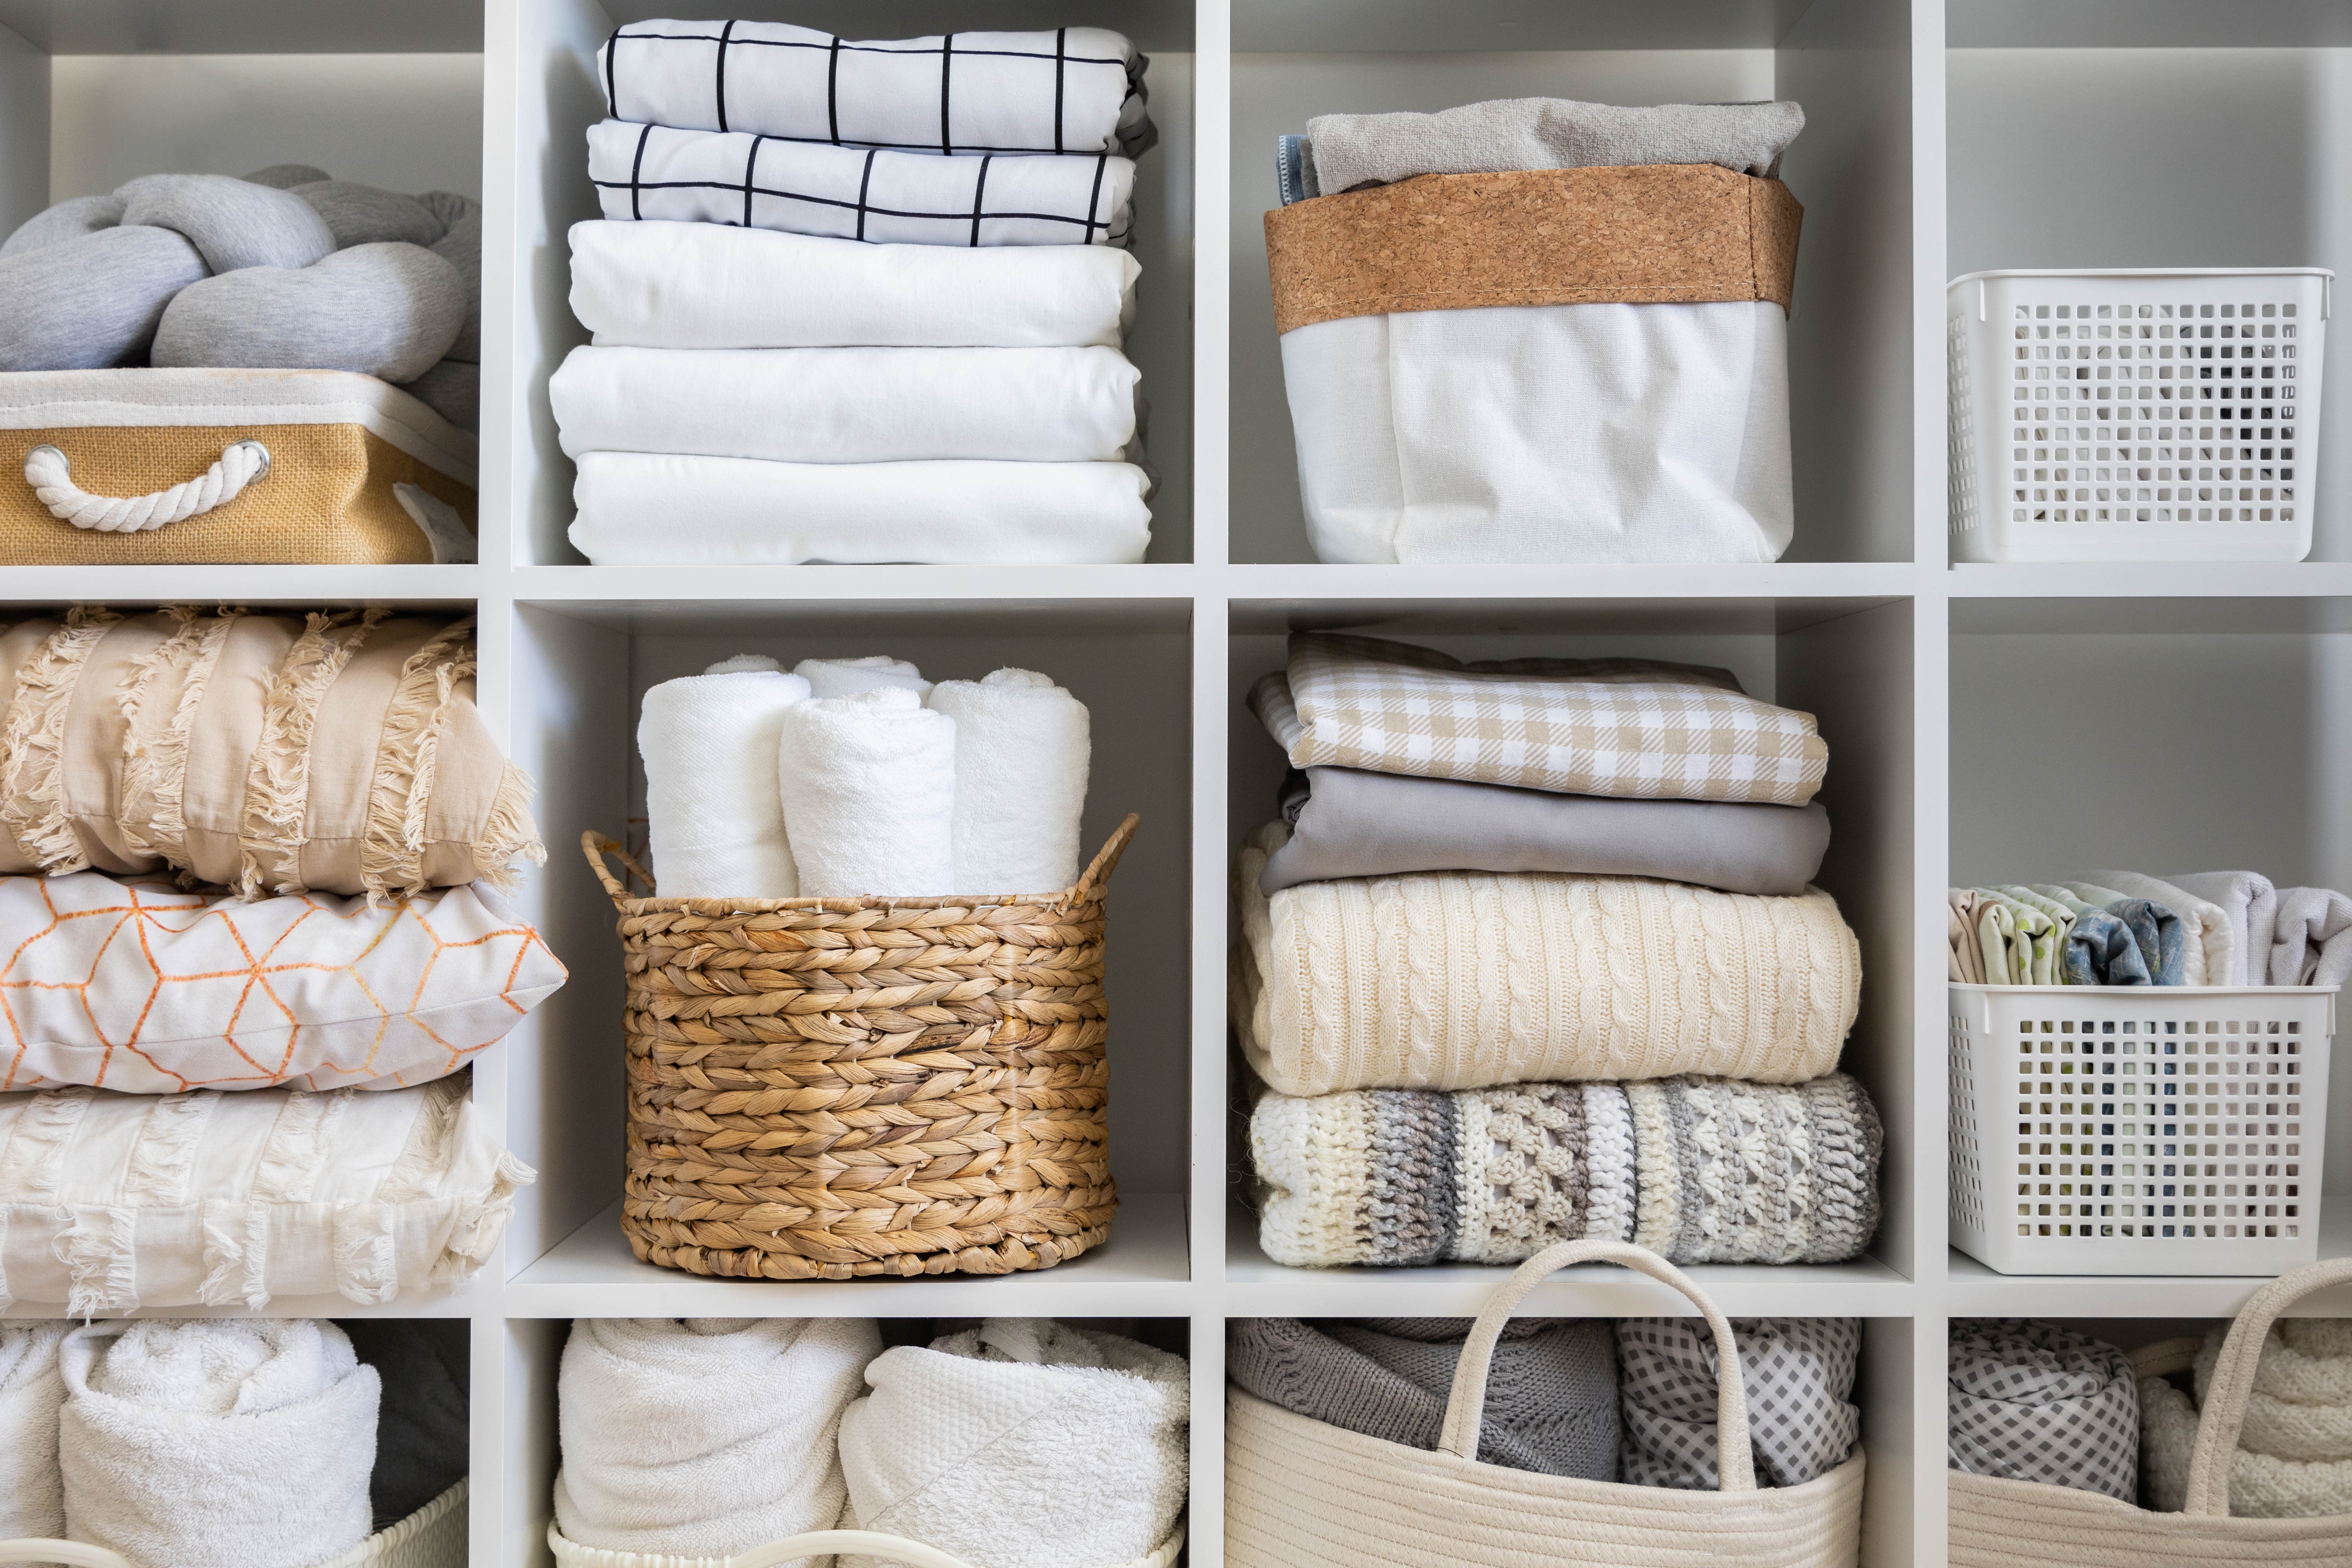 Advice on Organizing Your Home